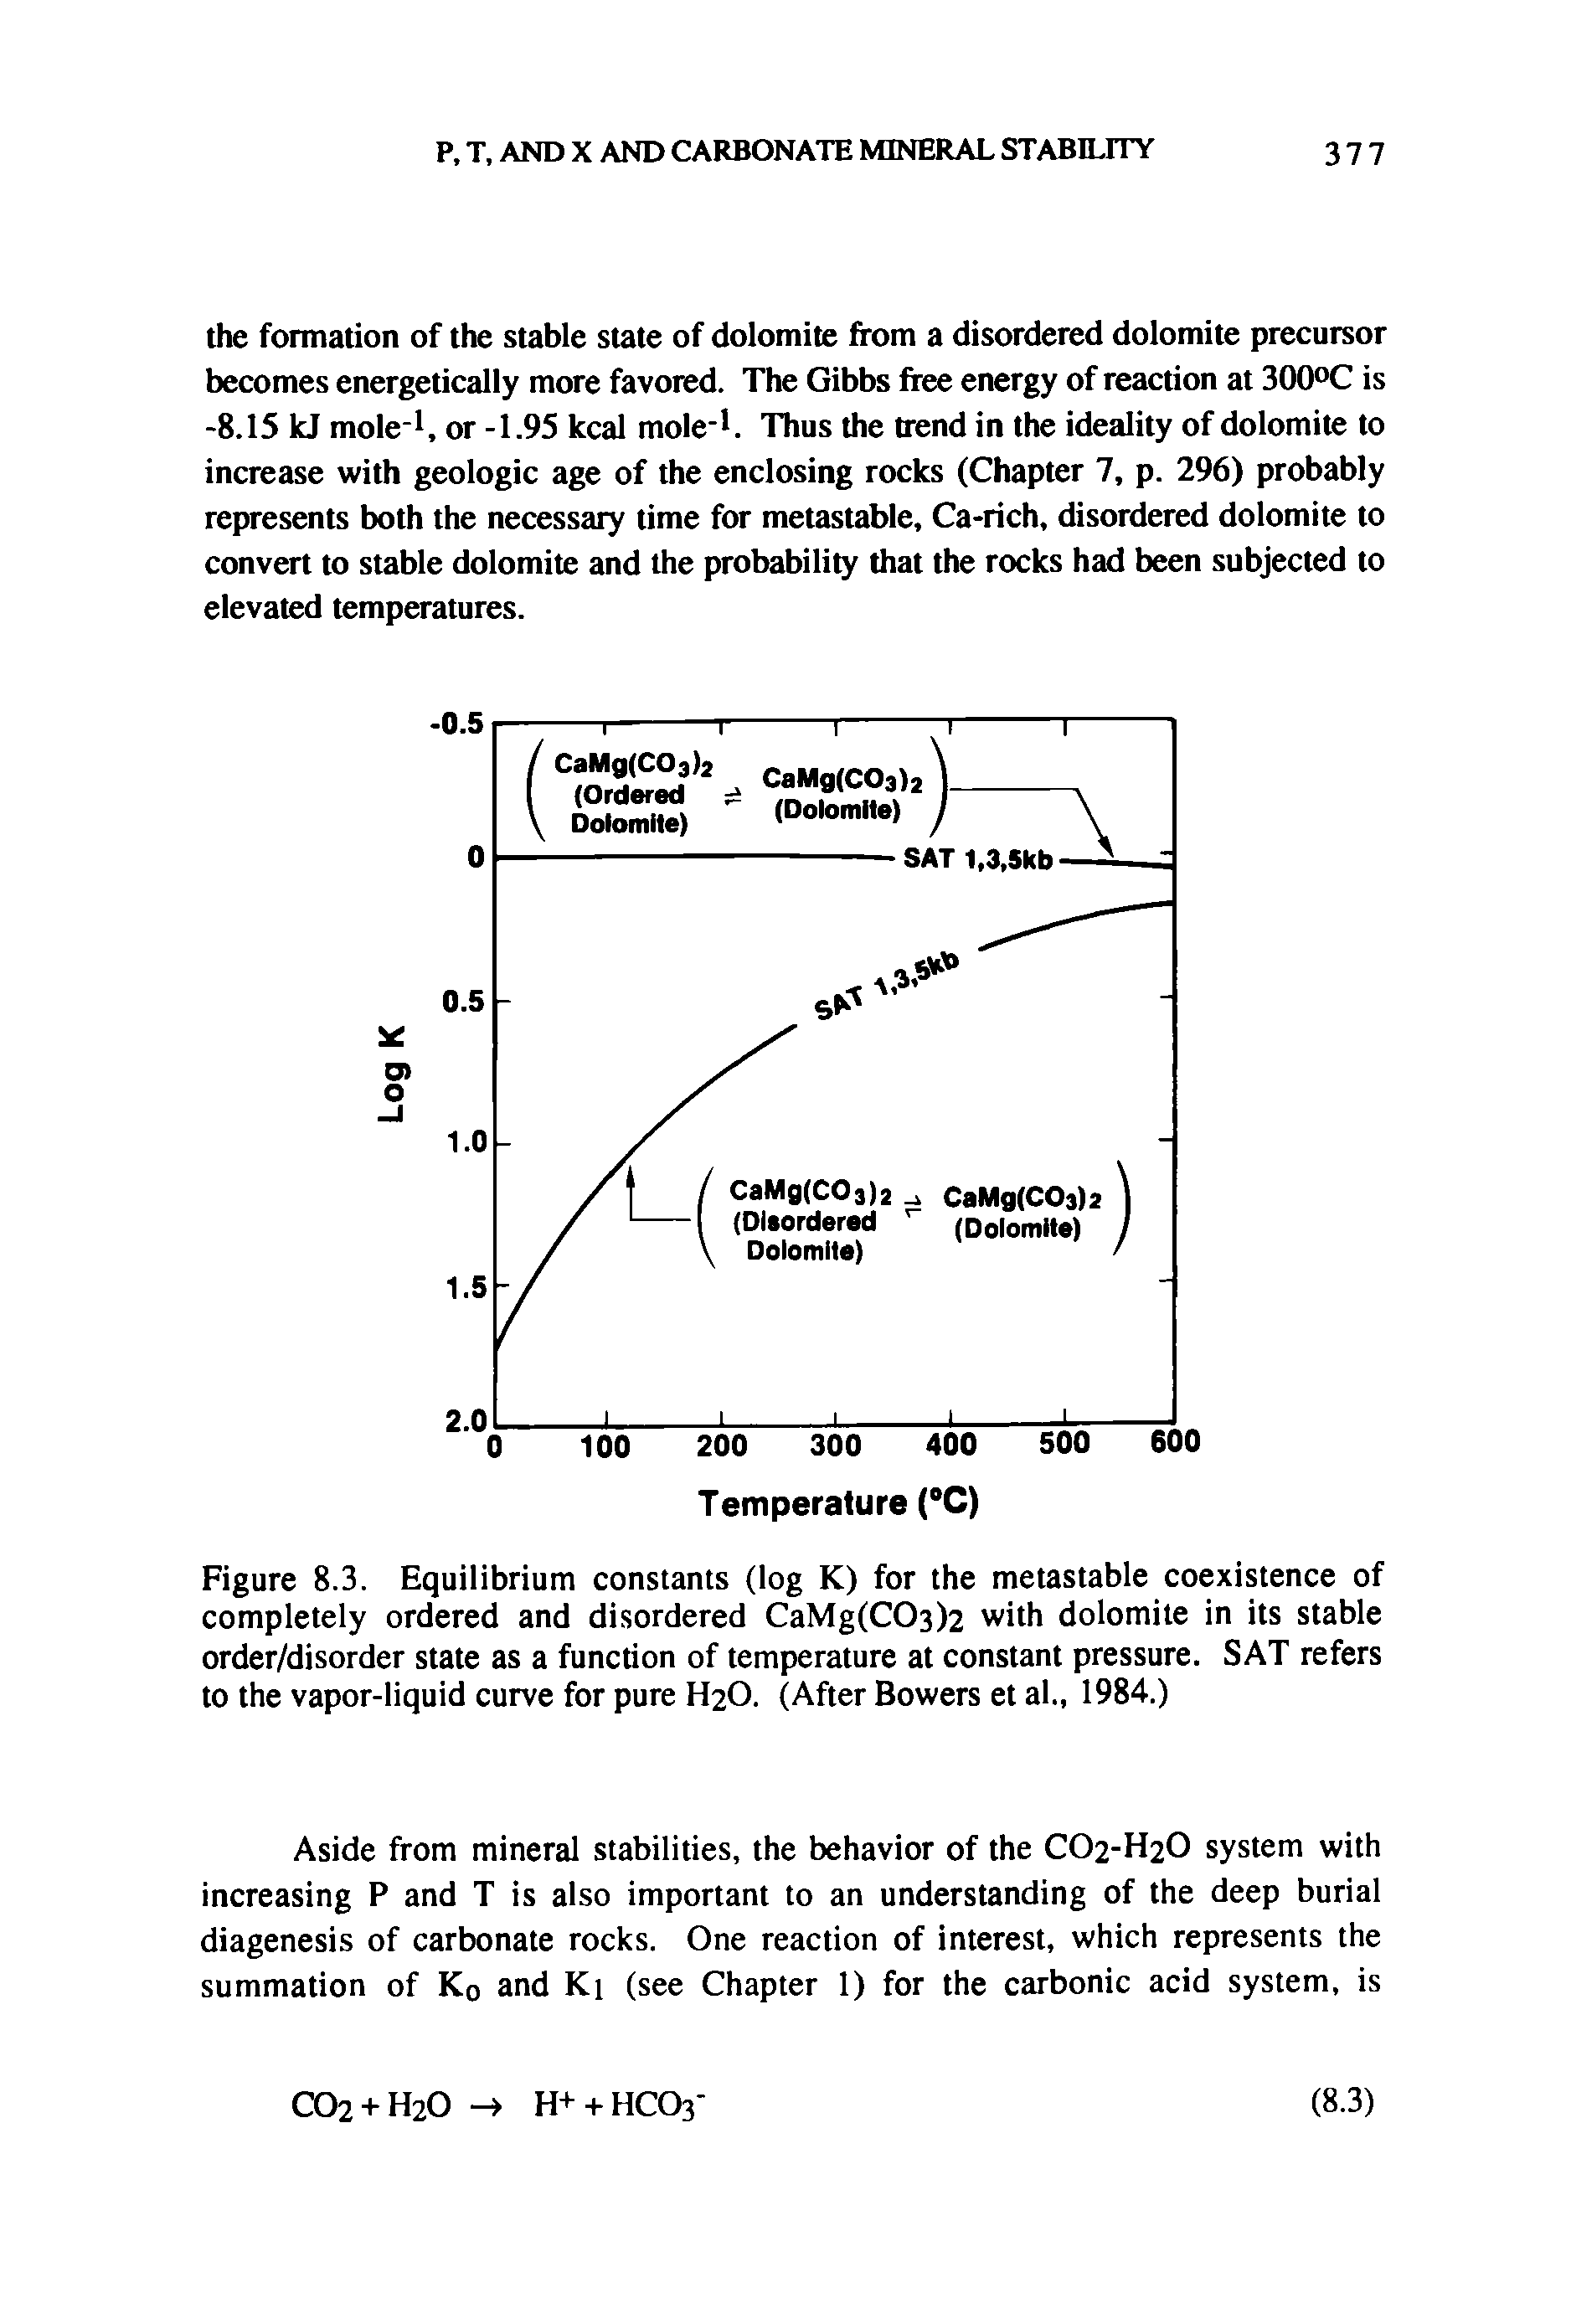 Figure 8.3. Equilibrium constants (log K) for the metastable coexistence of completely ordered and disordered CaMg(C03>2 with dolomite in its stable order/disorder state as a function of temperature at constant pressure. SAT refers to the vapor-liquid curve for pure H2O. (After Bowers et al., 1984.)...